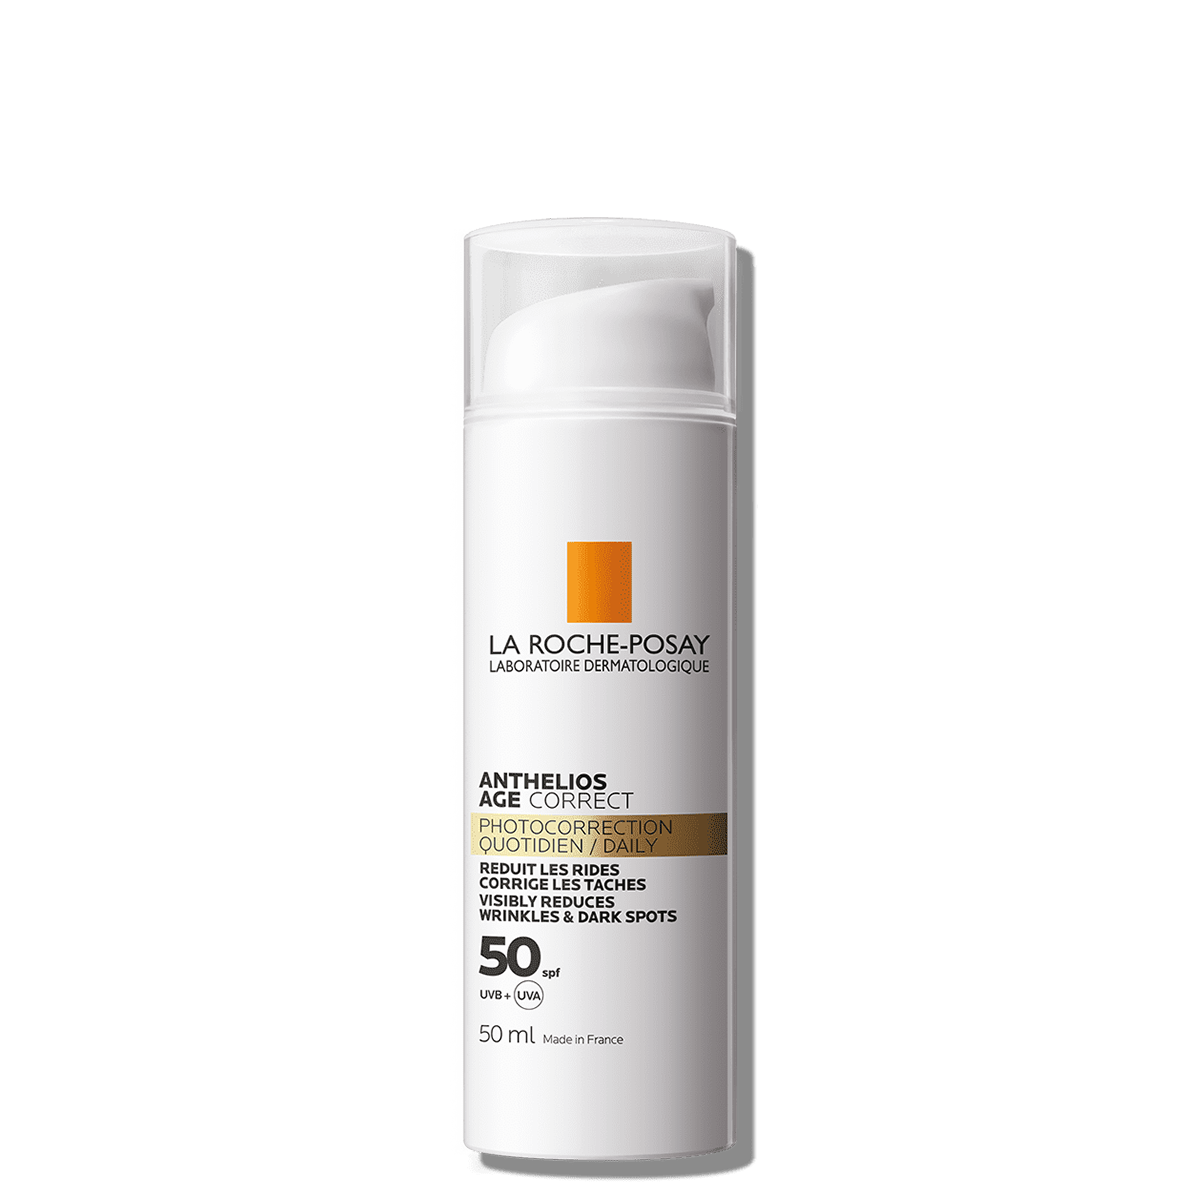 La-Roche-Posay-Anthelios-Age-Correct-SPF50-50ml-NoTeinted-LD-000-3337875761031-Closed-FSS